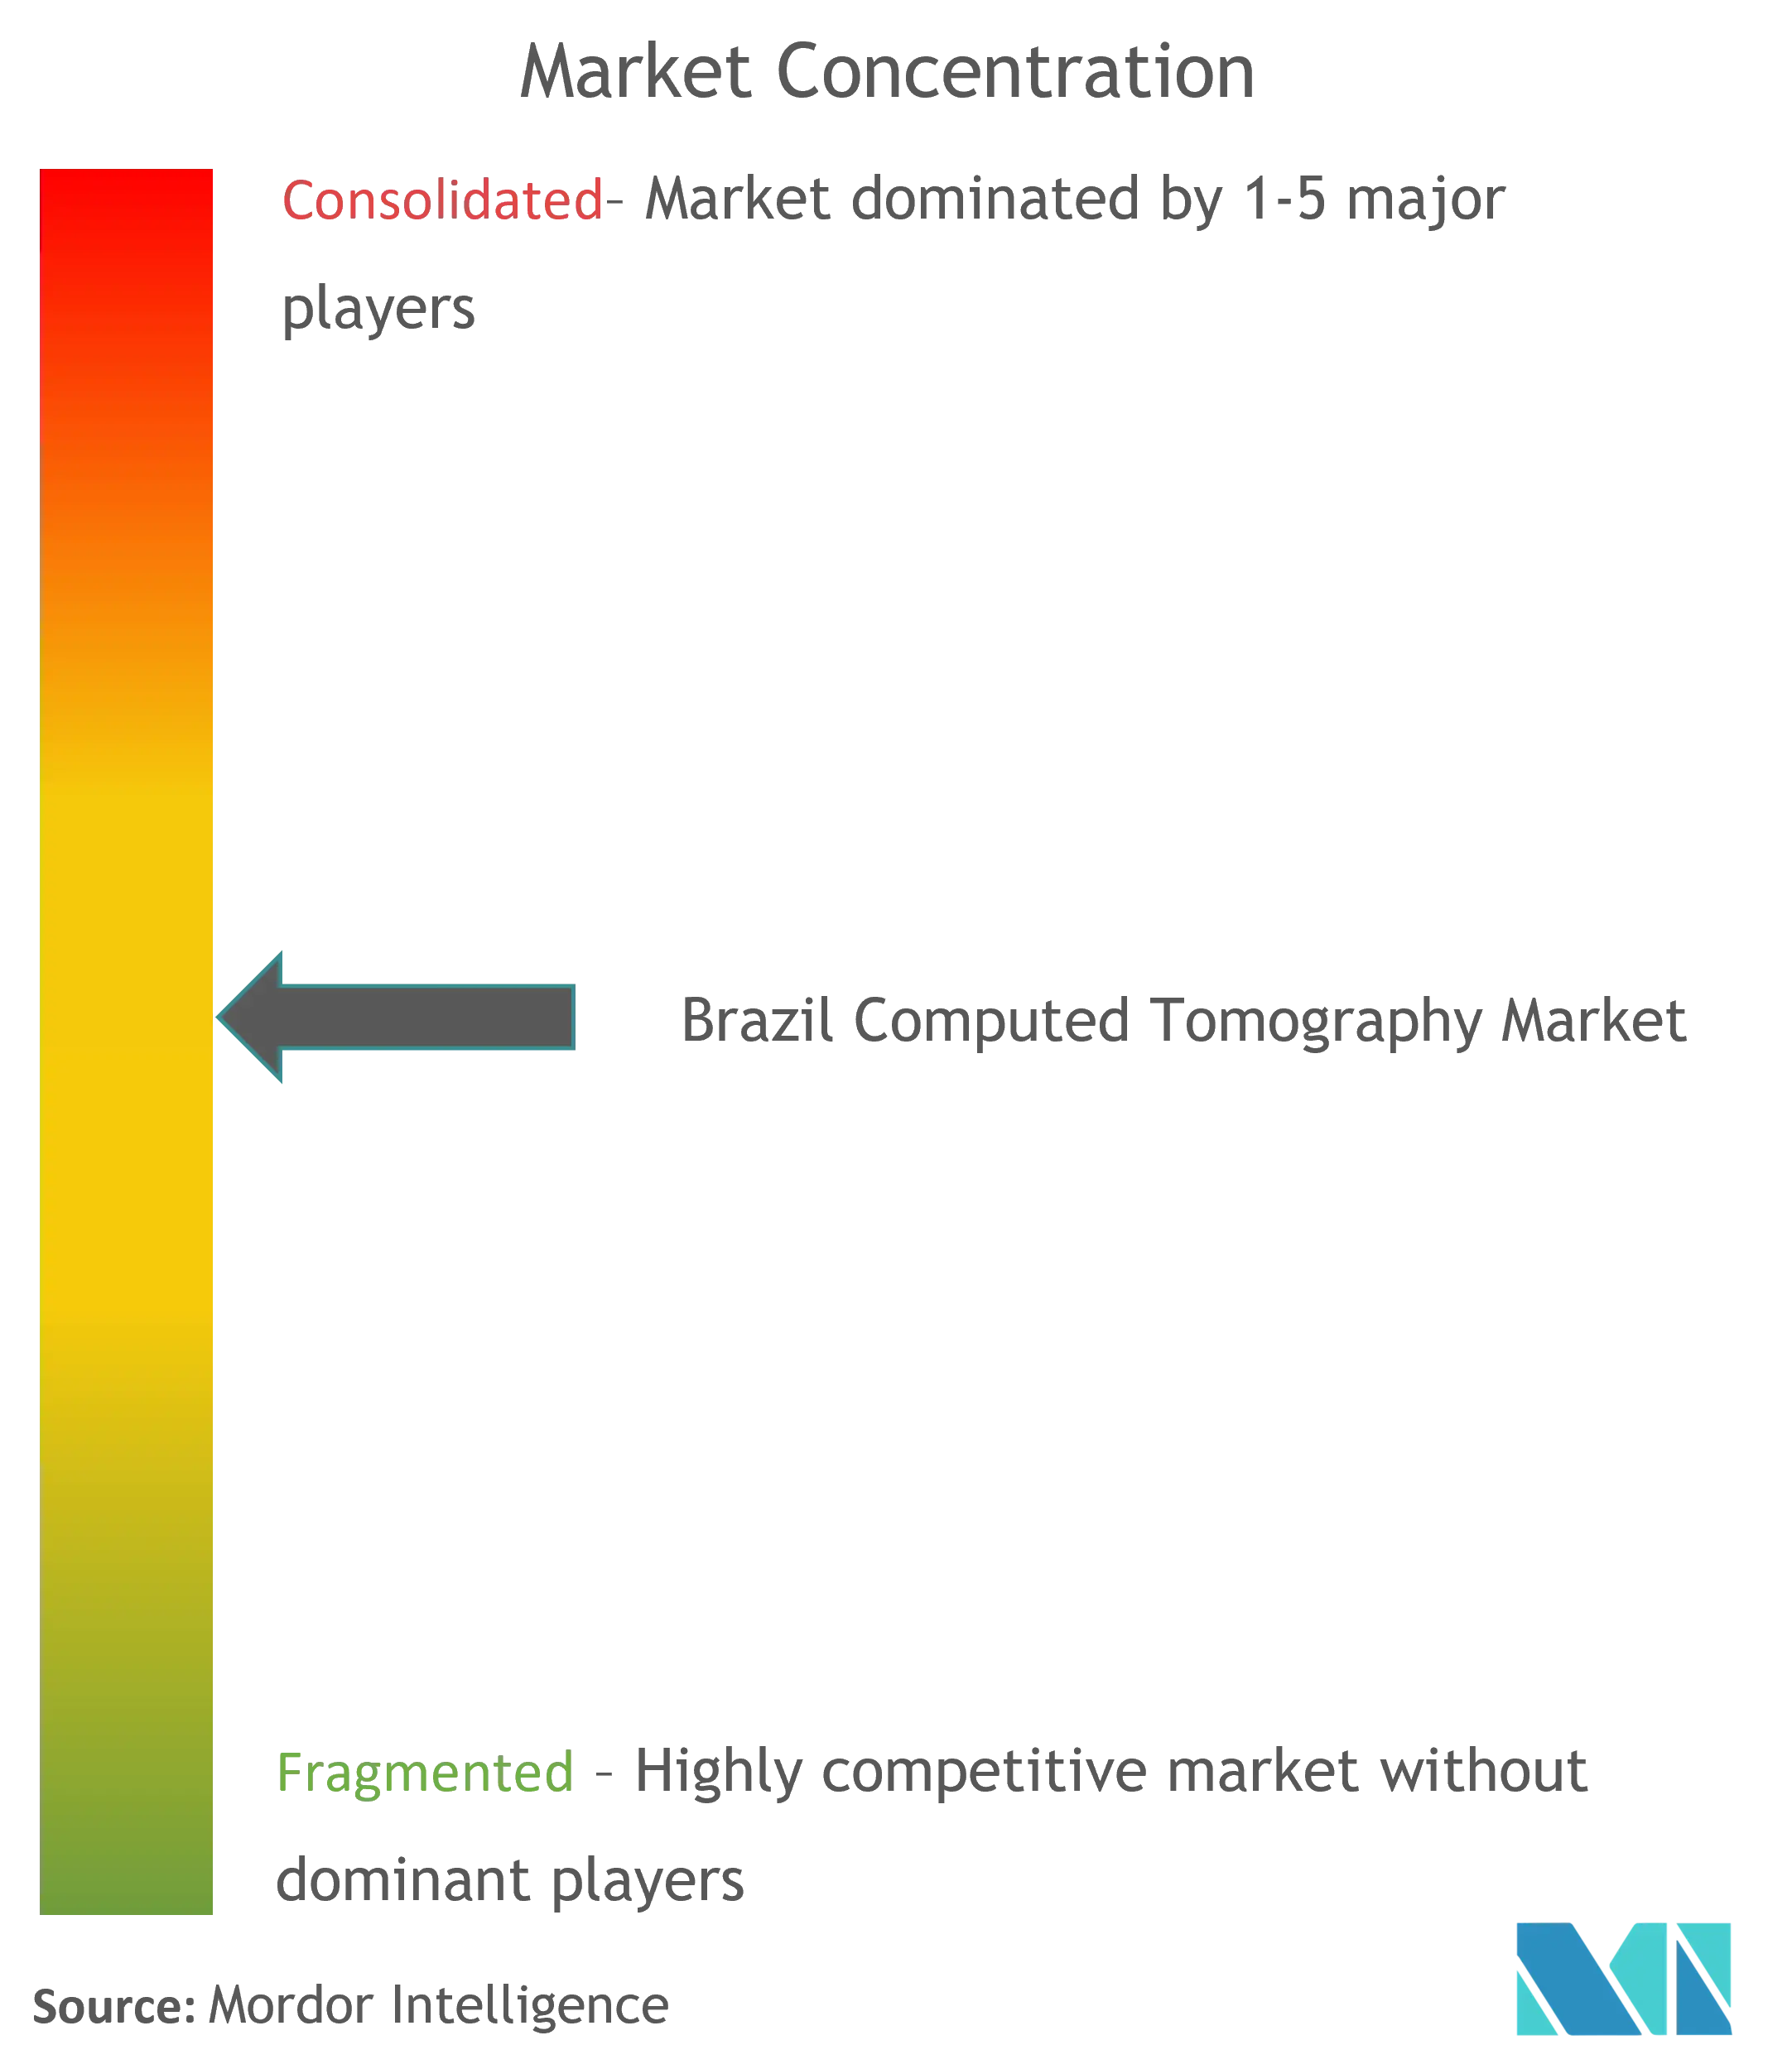 Brazil Computed Tomography Market Concentration